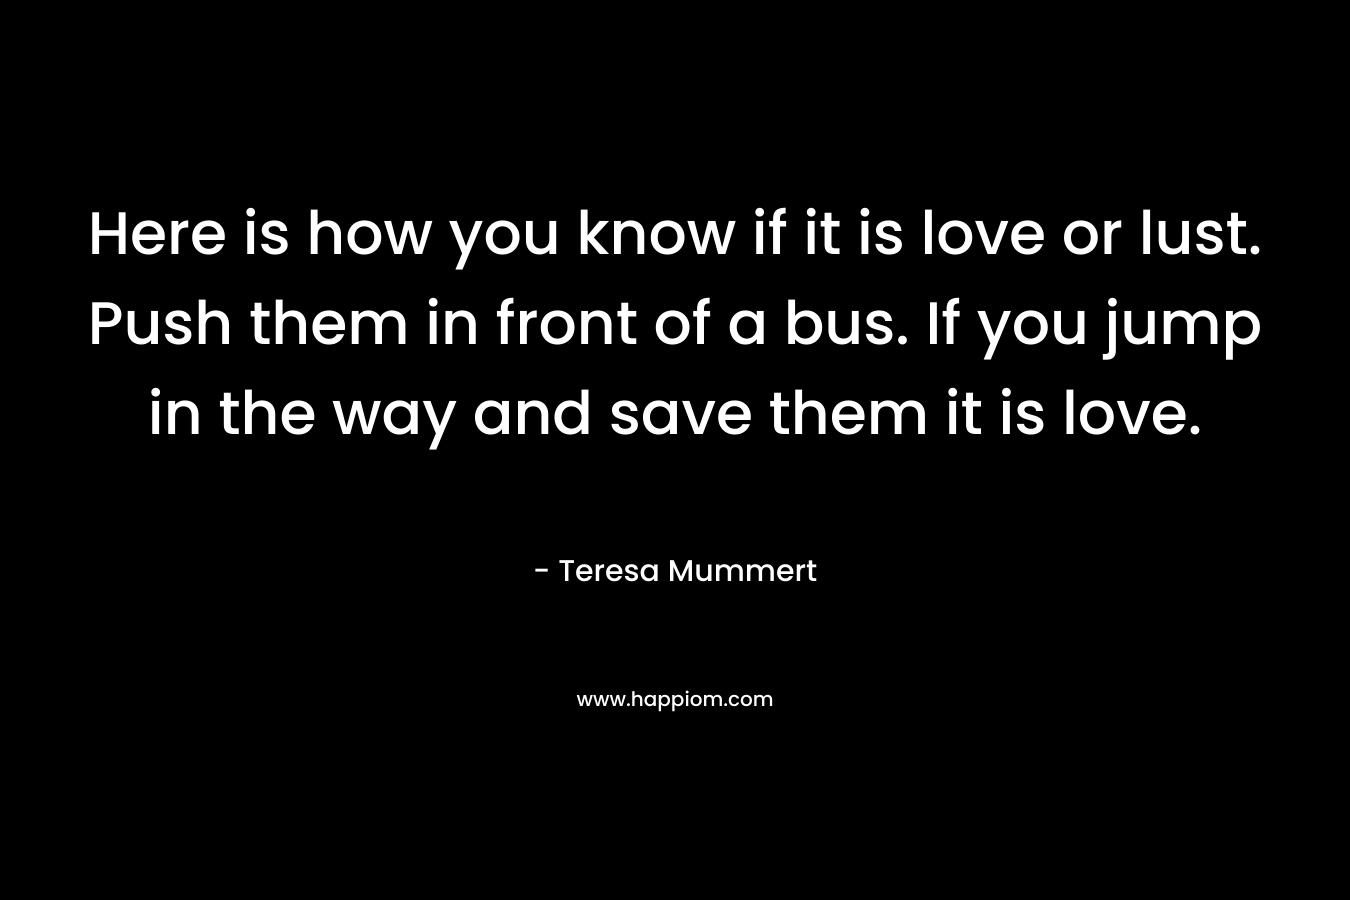 Here is how you know if it is love or lust. Push them in front of a bus. If you jump in the way and save them it is love. – Teresa Mummert